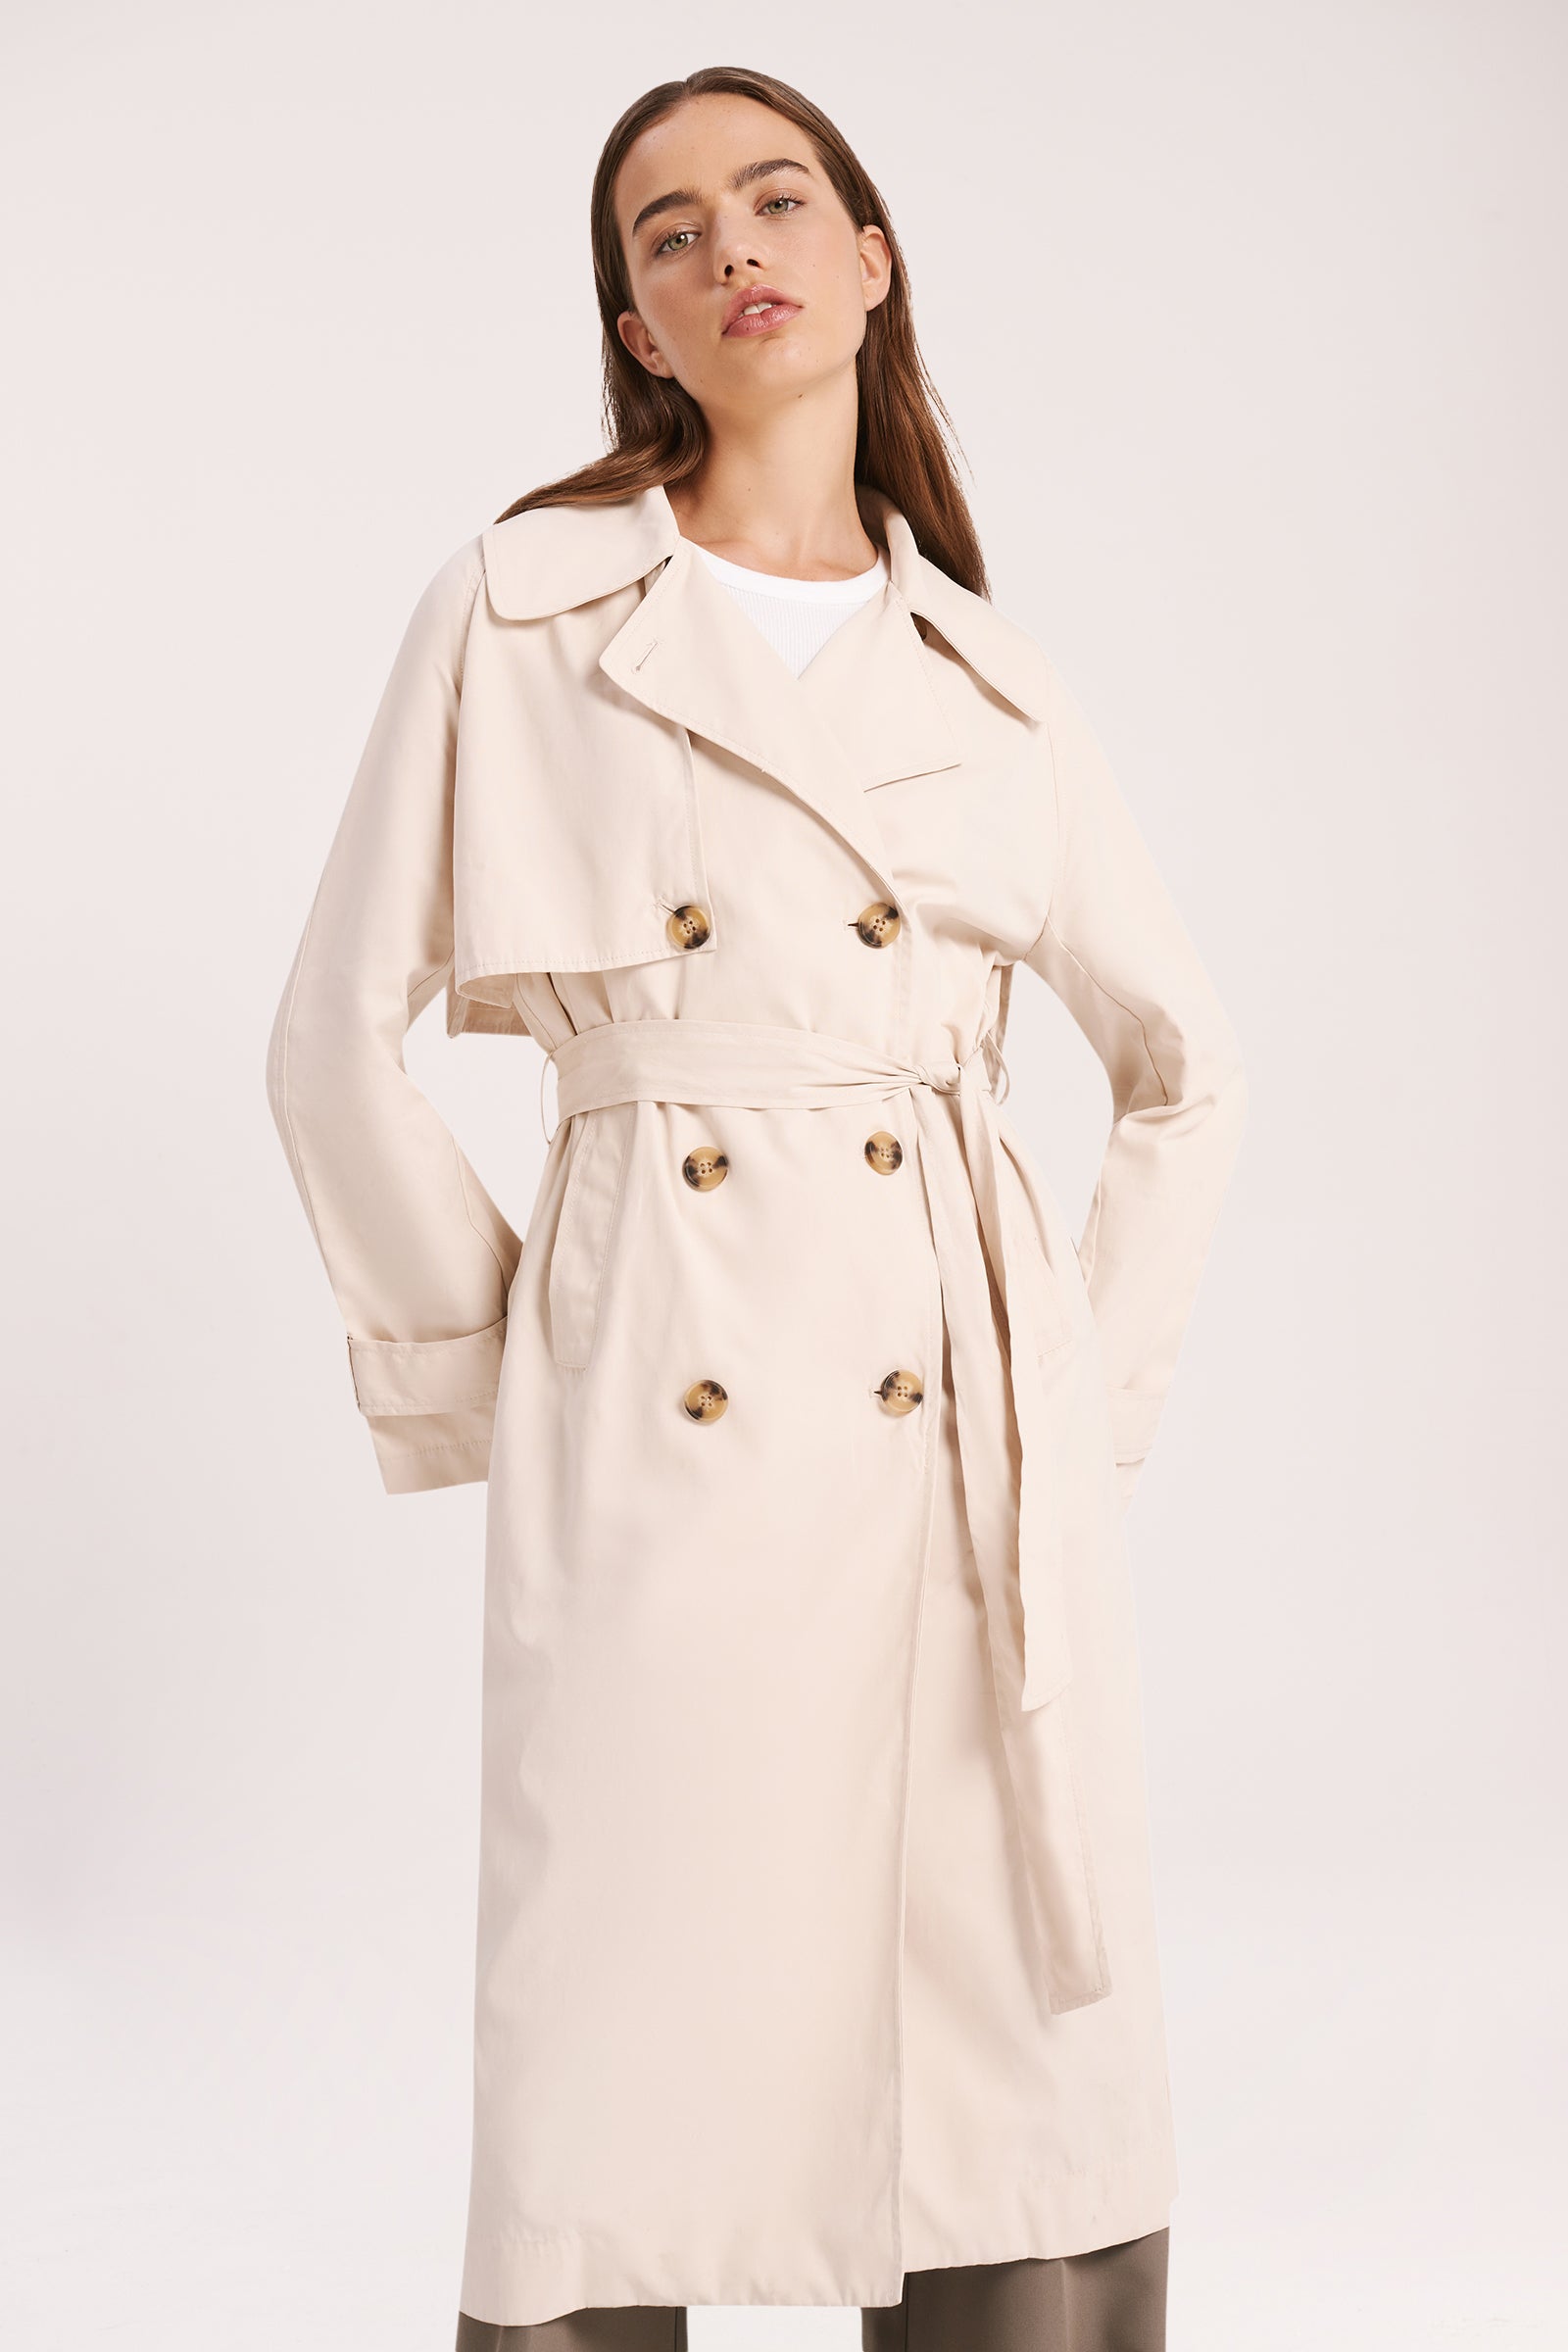 Nude Lucy Odyssey Trench Coat Coat in White Cloud